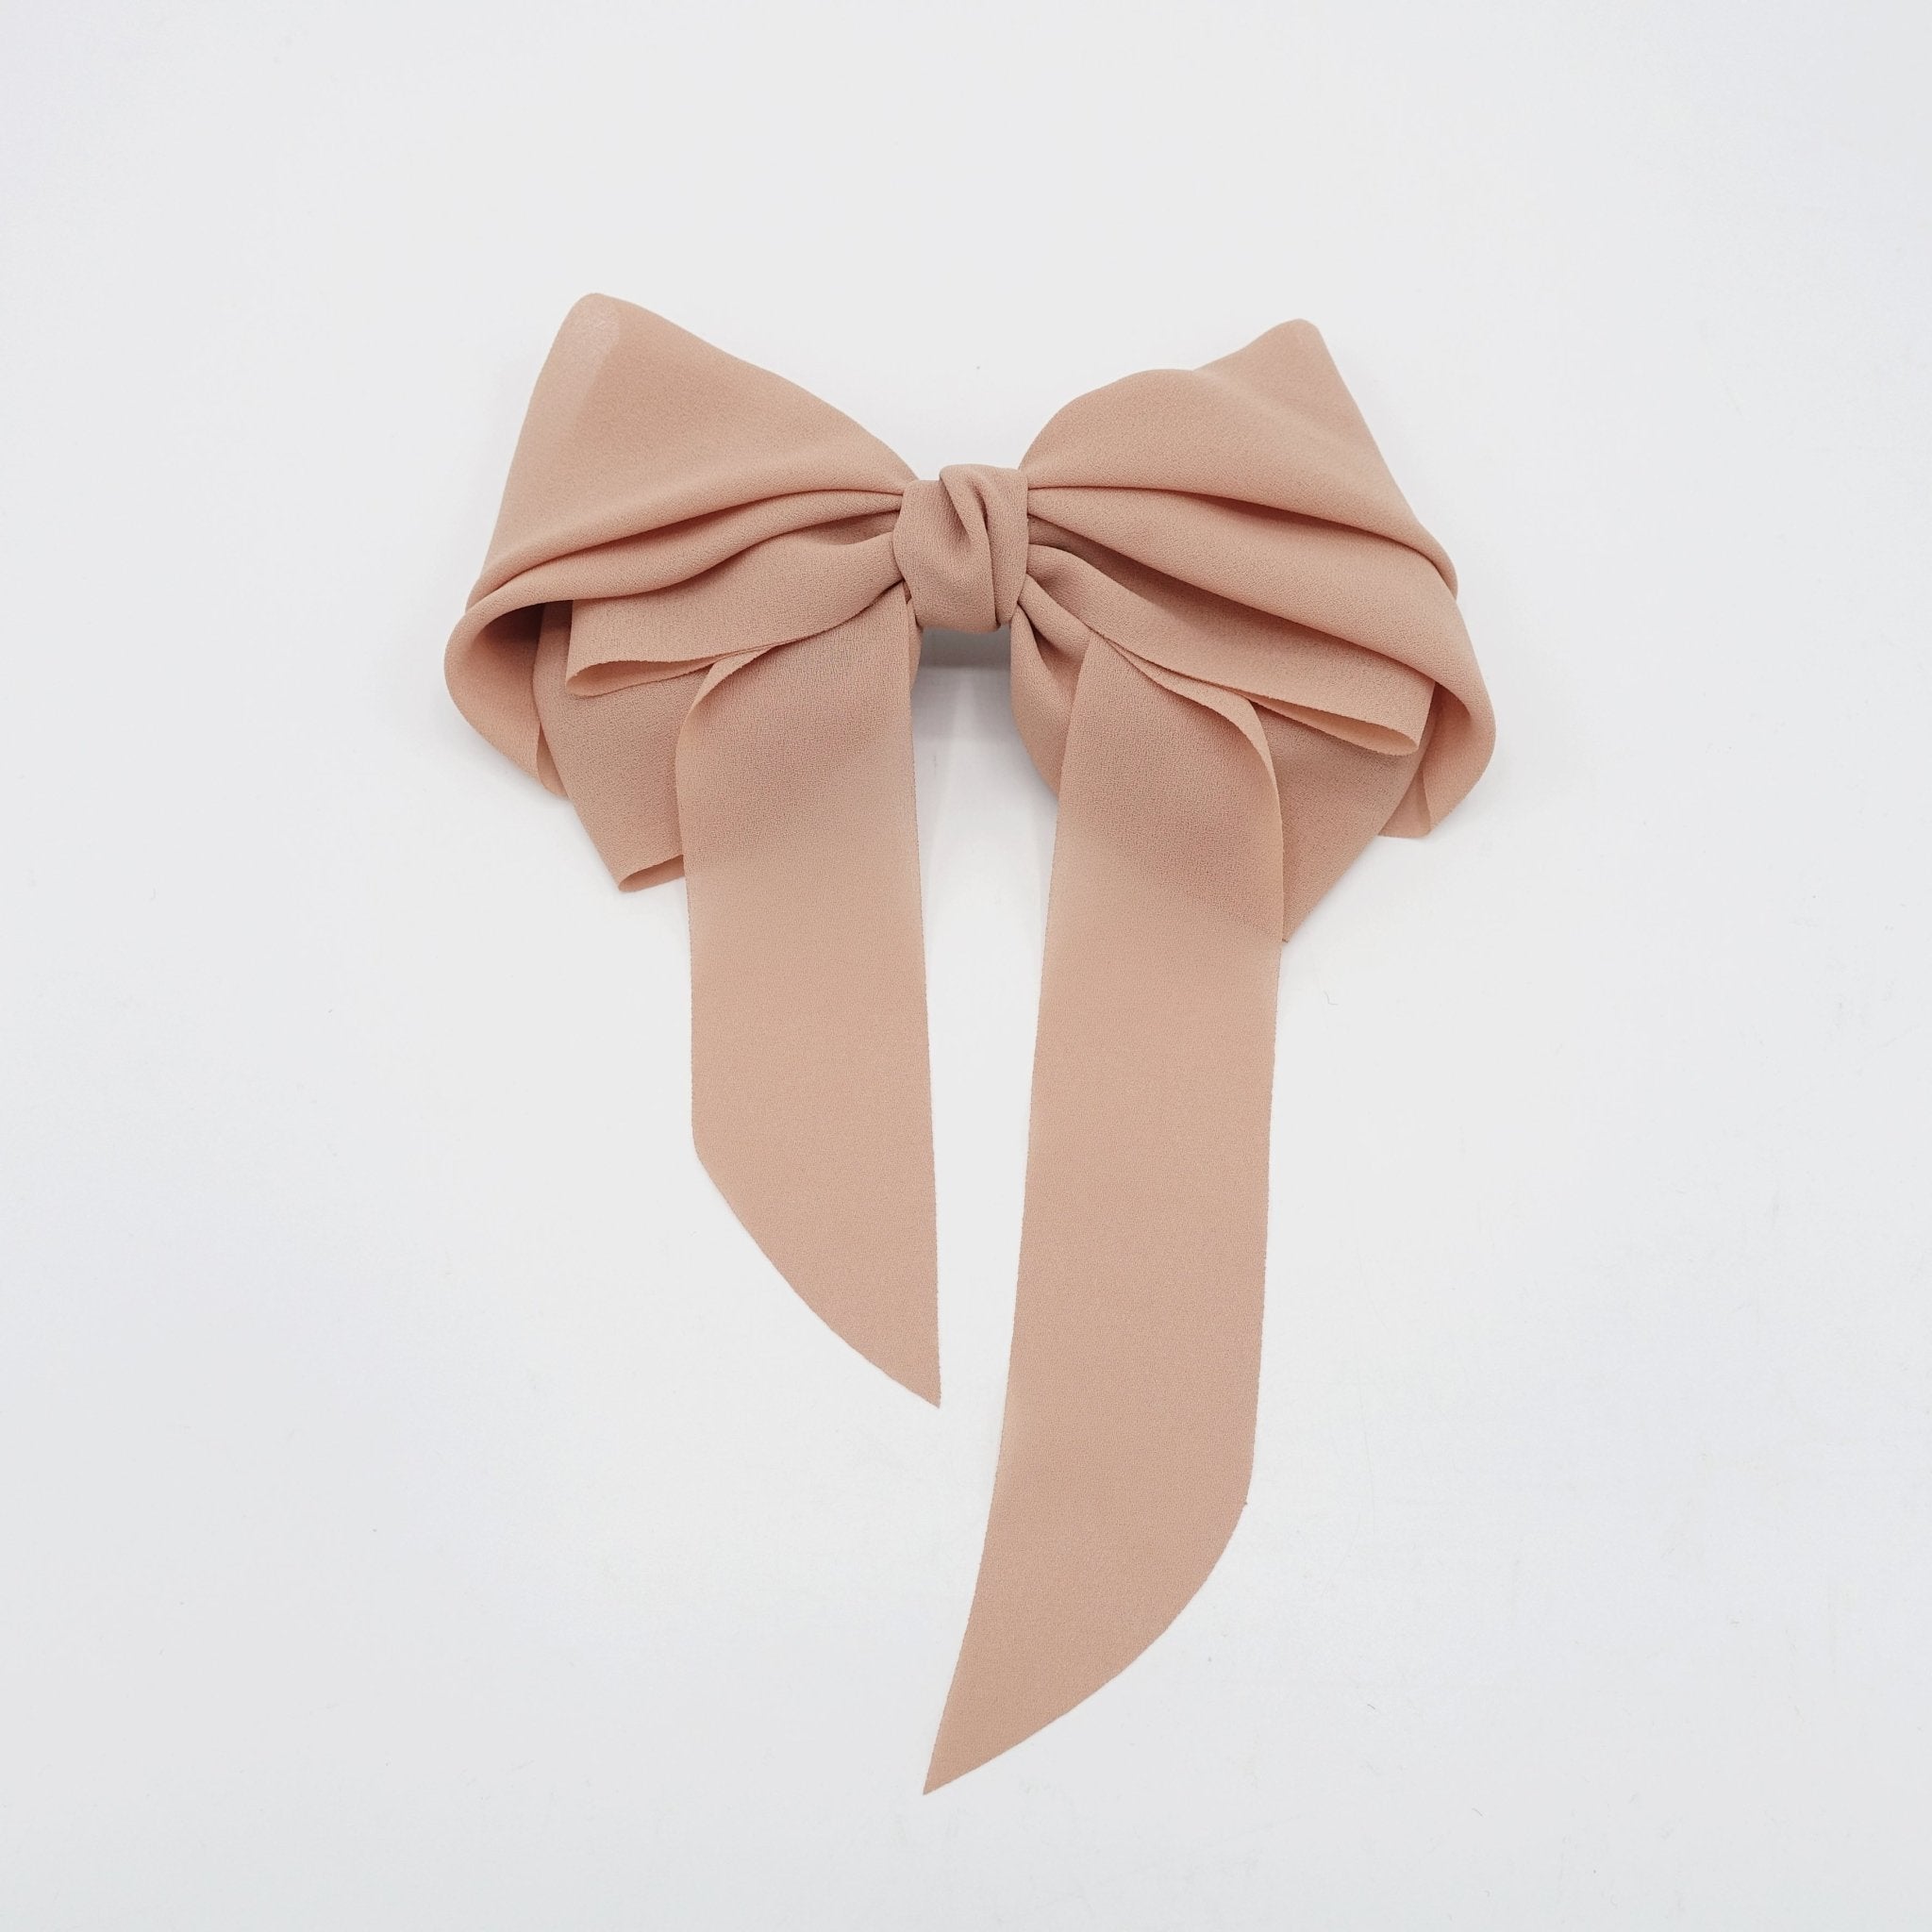 VeryShine Barrettes & Clips Peach beige chiffon hair bow wing stacked style solid color VeryShine hair accessories for women